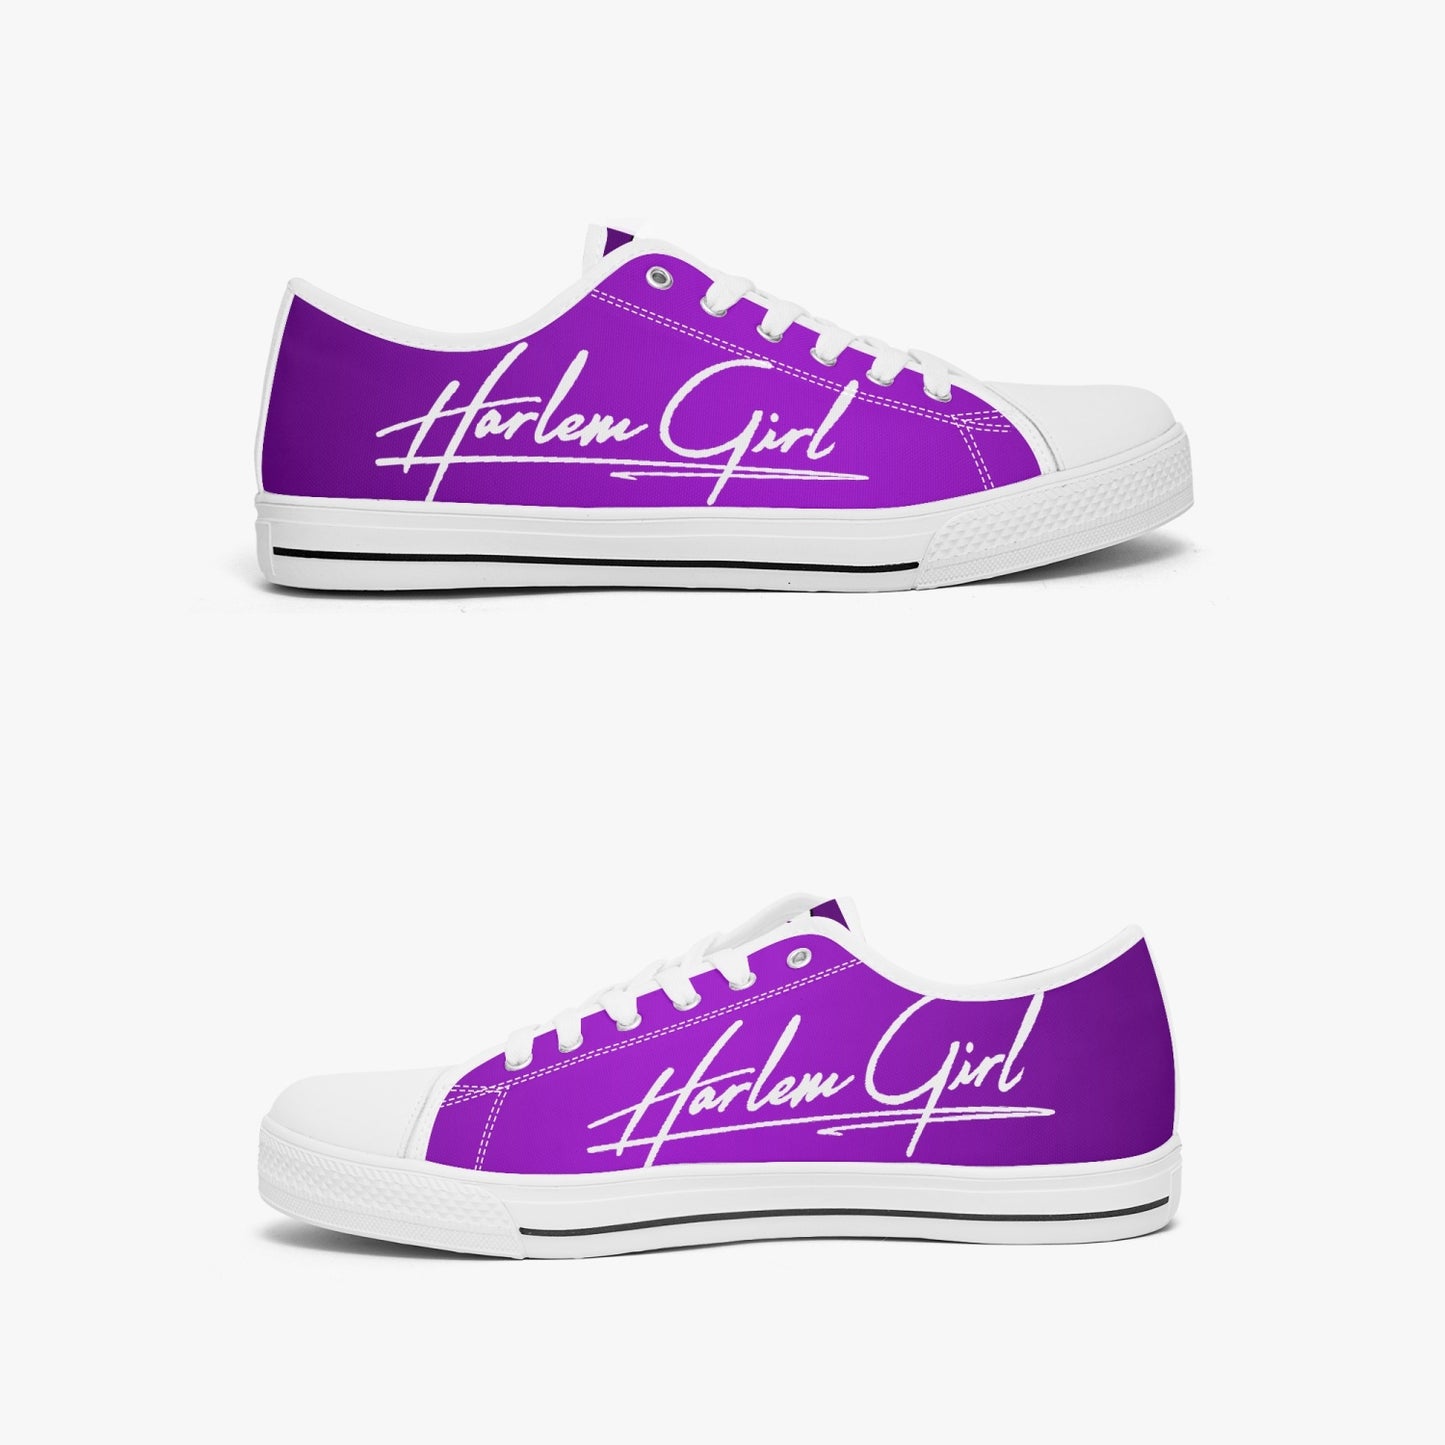 HB Harlem Girl "Lenox Ave" Classic Low Tops - Amethyst - Women (Black or White Sole)